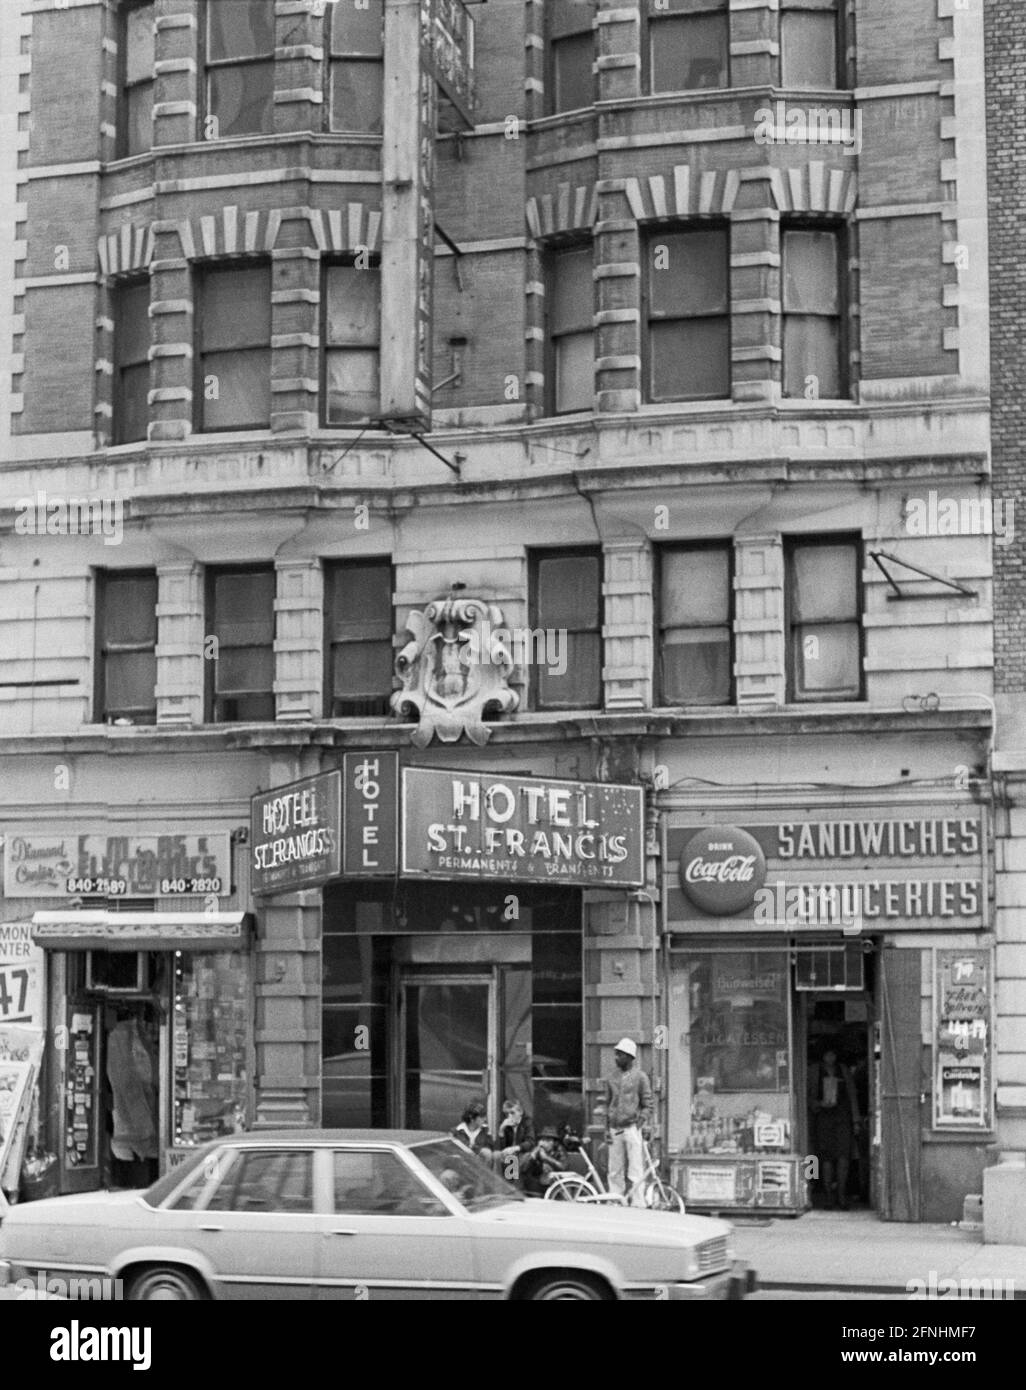 New York City Photo Essay, April 30, 1981- Hotel St. Francis for permanent and transient residents. Broadway and West 47th Street, Diamond Center, Manhattan. Stock Photo